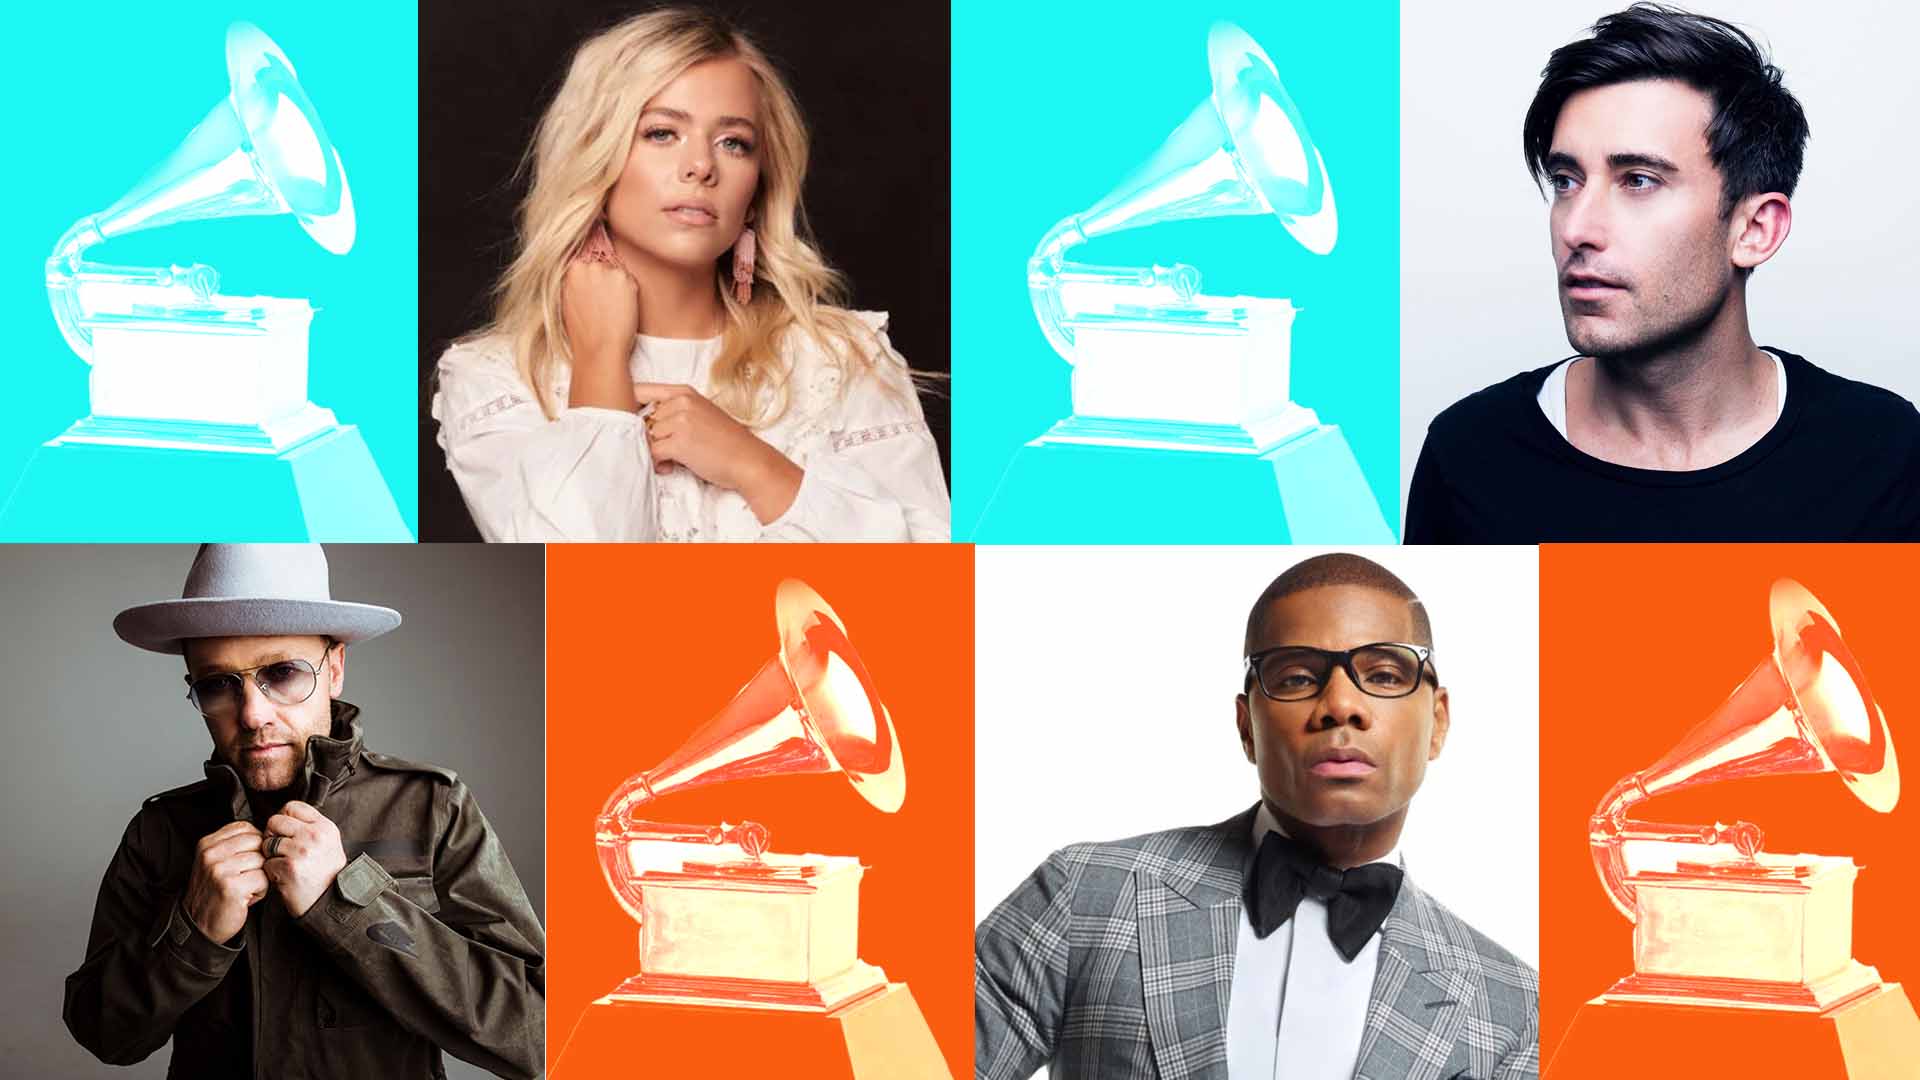 Christian Artists Nominated for a 2023 Grammy Award